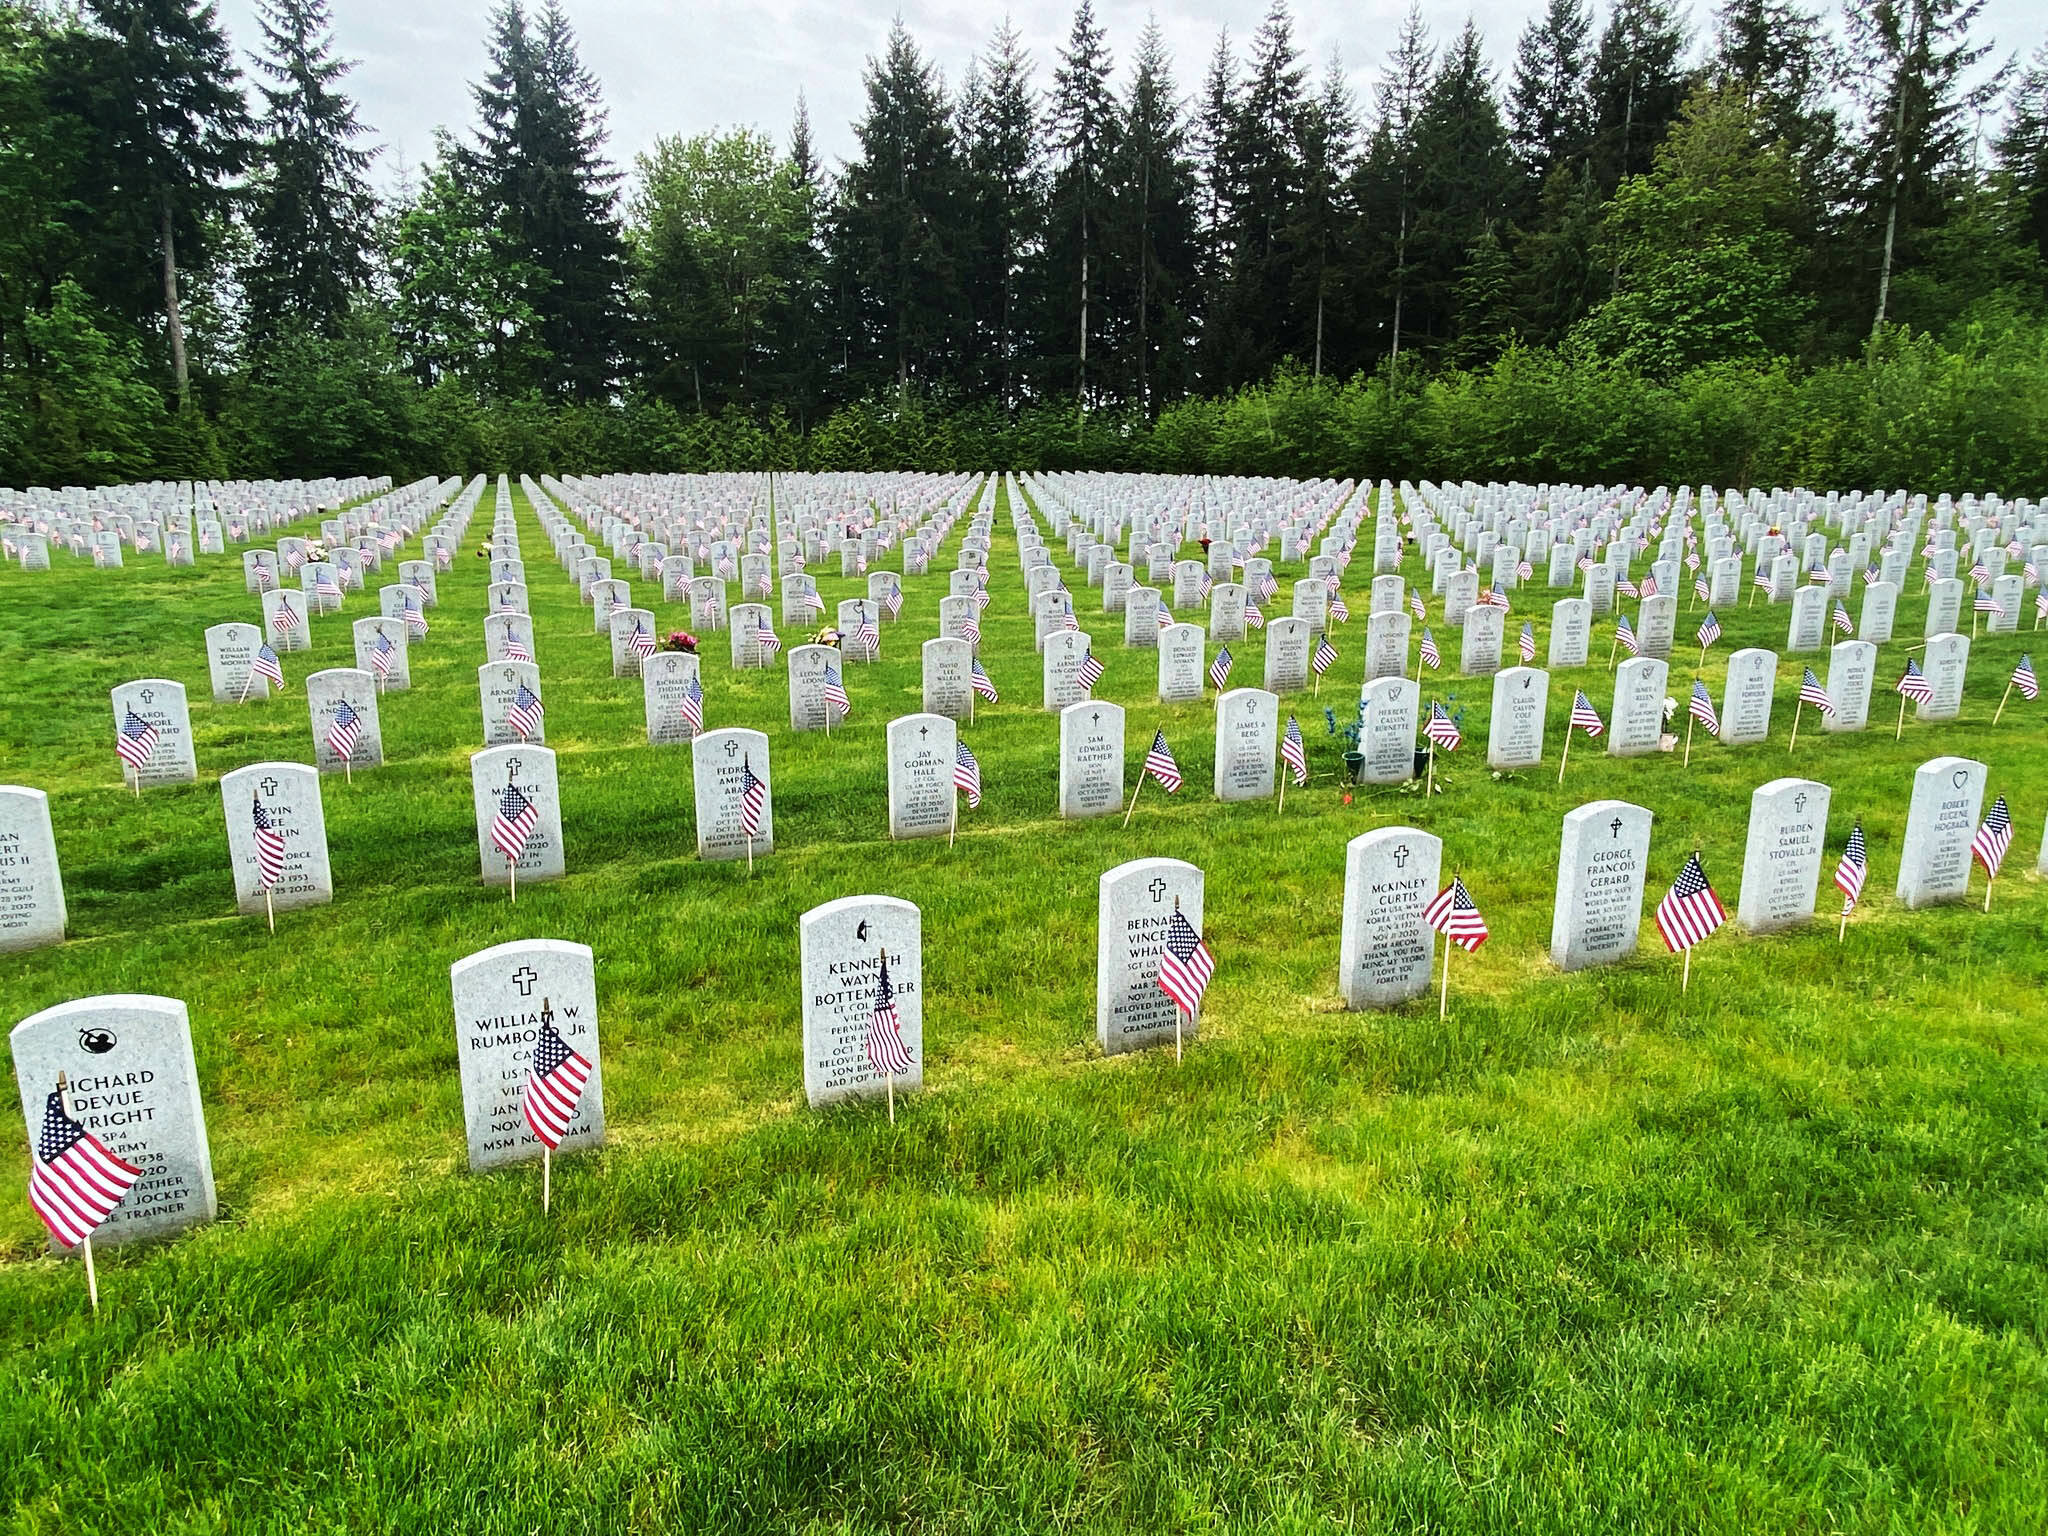 Tahoma National Cemetery, just east of Kent, will have a Memorial Day Commemorative Ceremony for the public at 1 p.m. Monday, May 27. COURTESY PHOTO, Tahoma National Cemetery